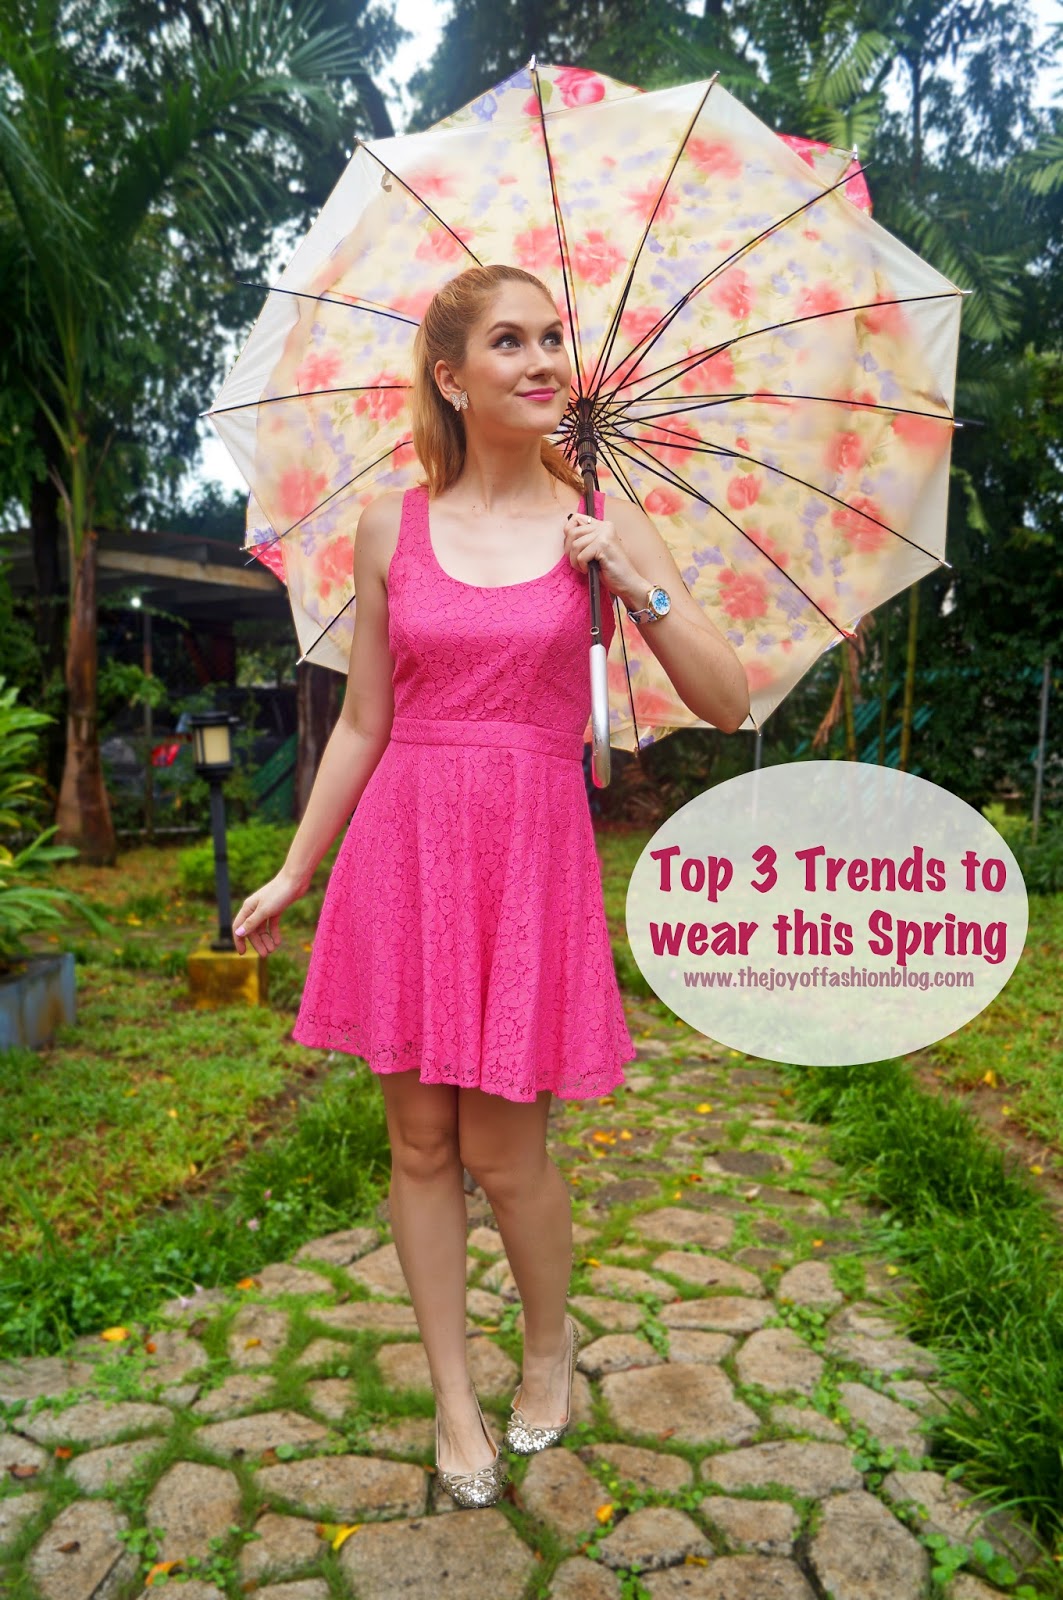 Top 3 trends to wear this Spring 2015!